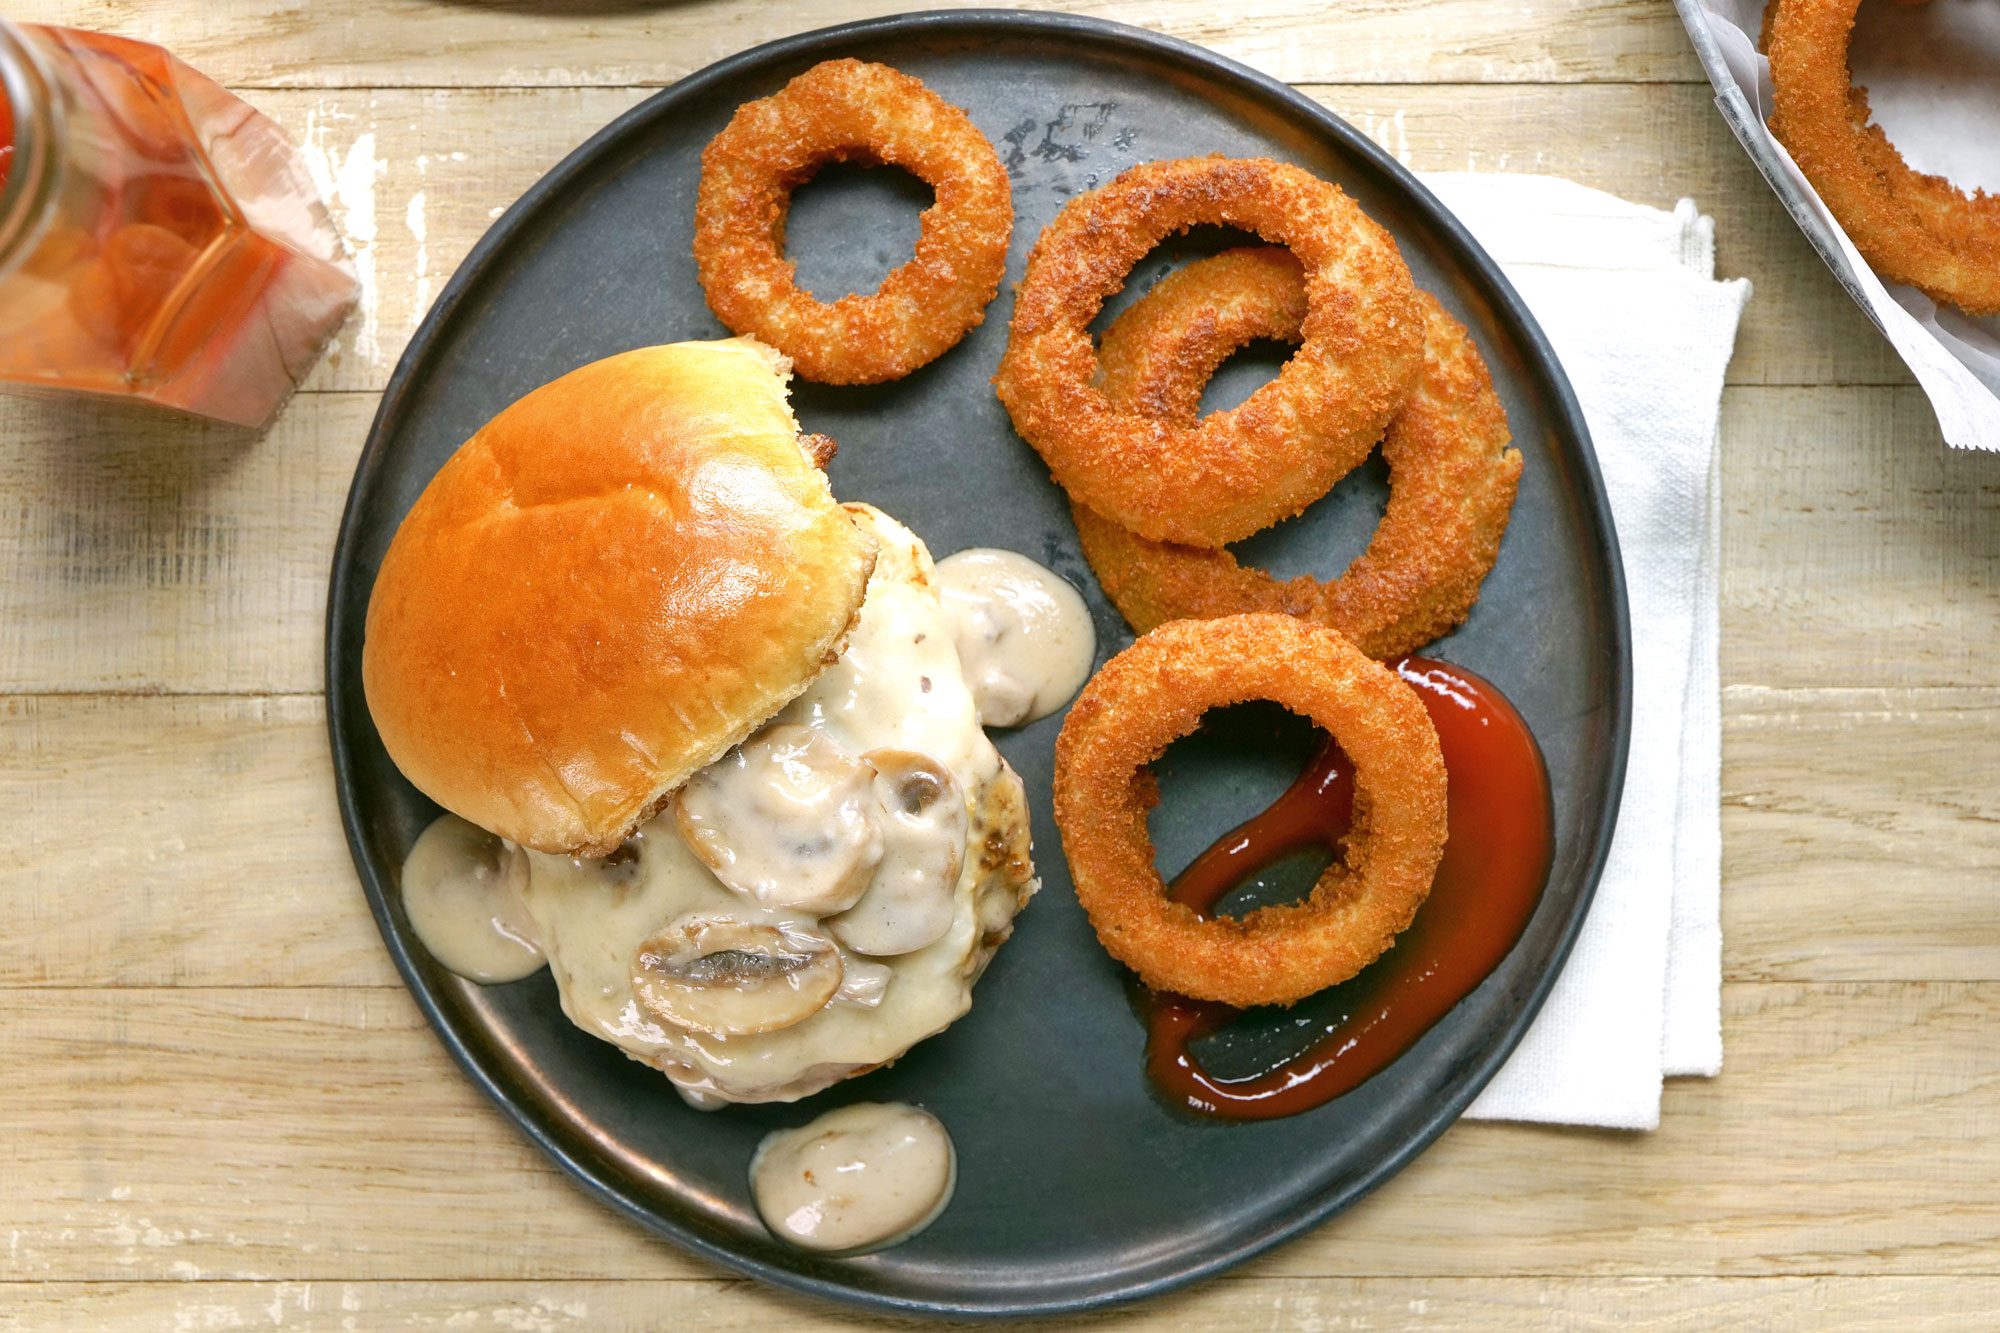 A plate with a Mushroom Swiss Burger and onion rings on the side